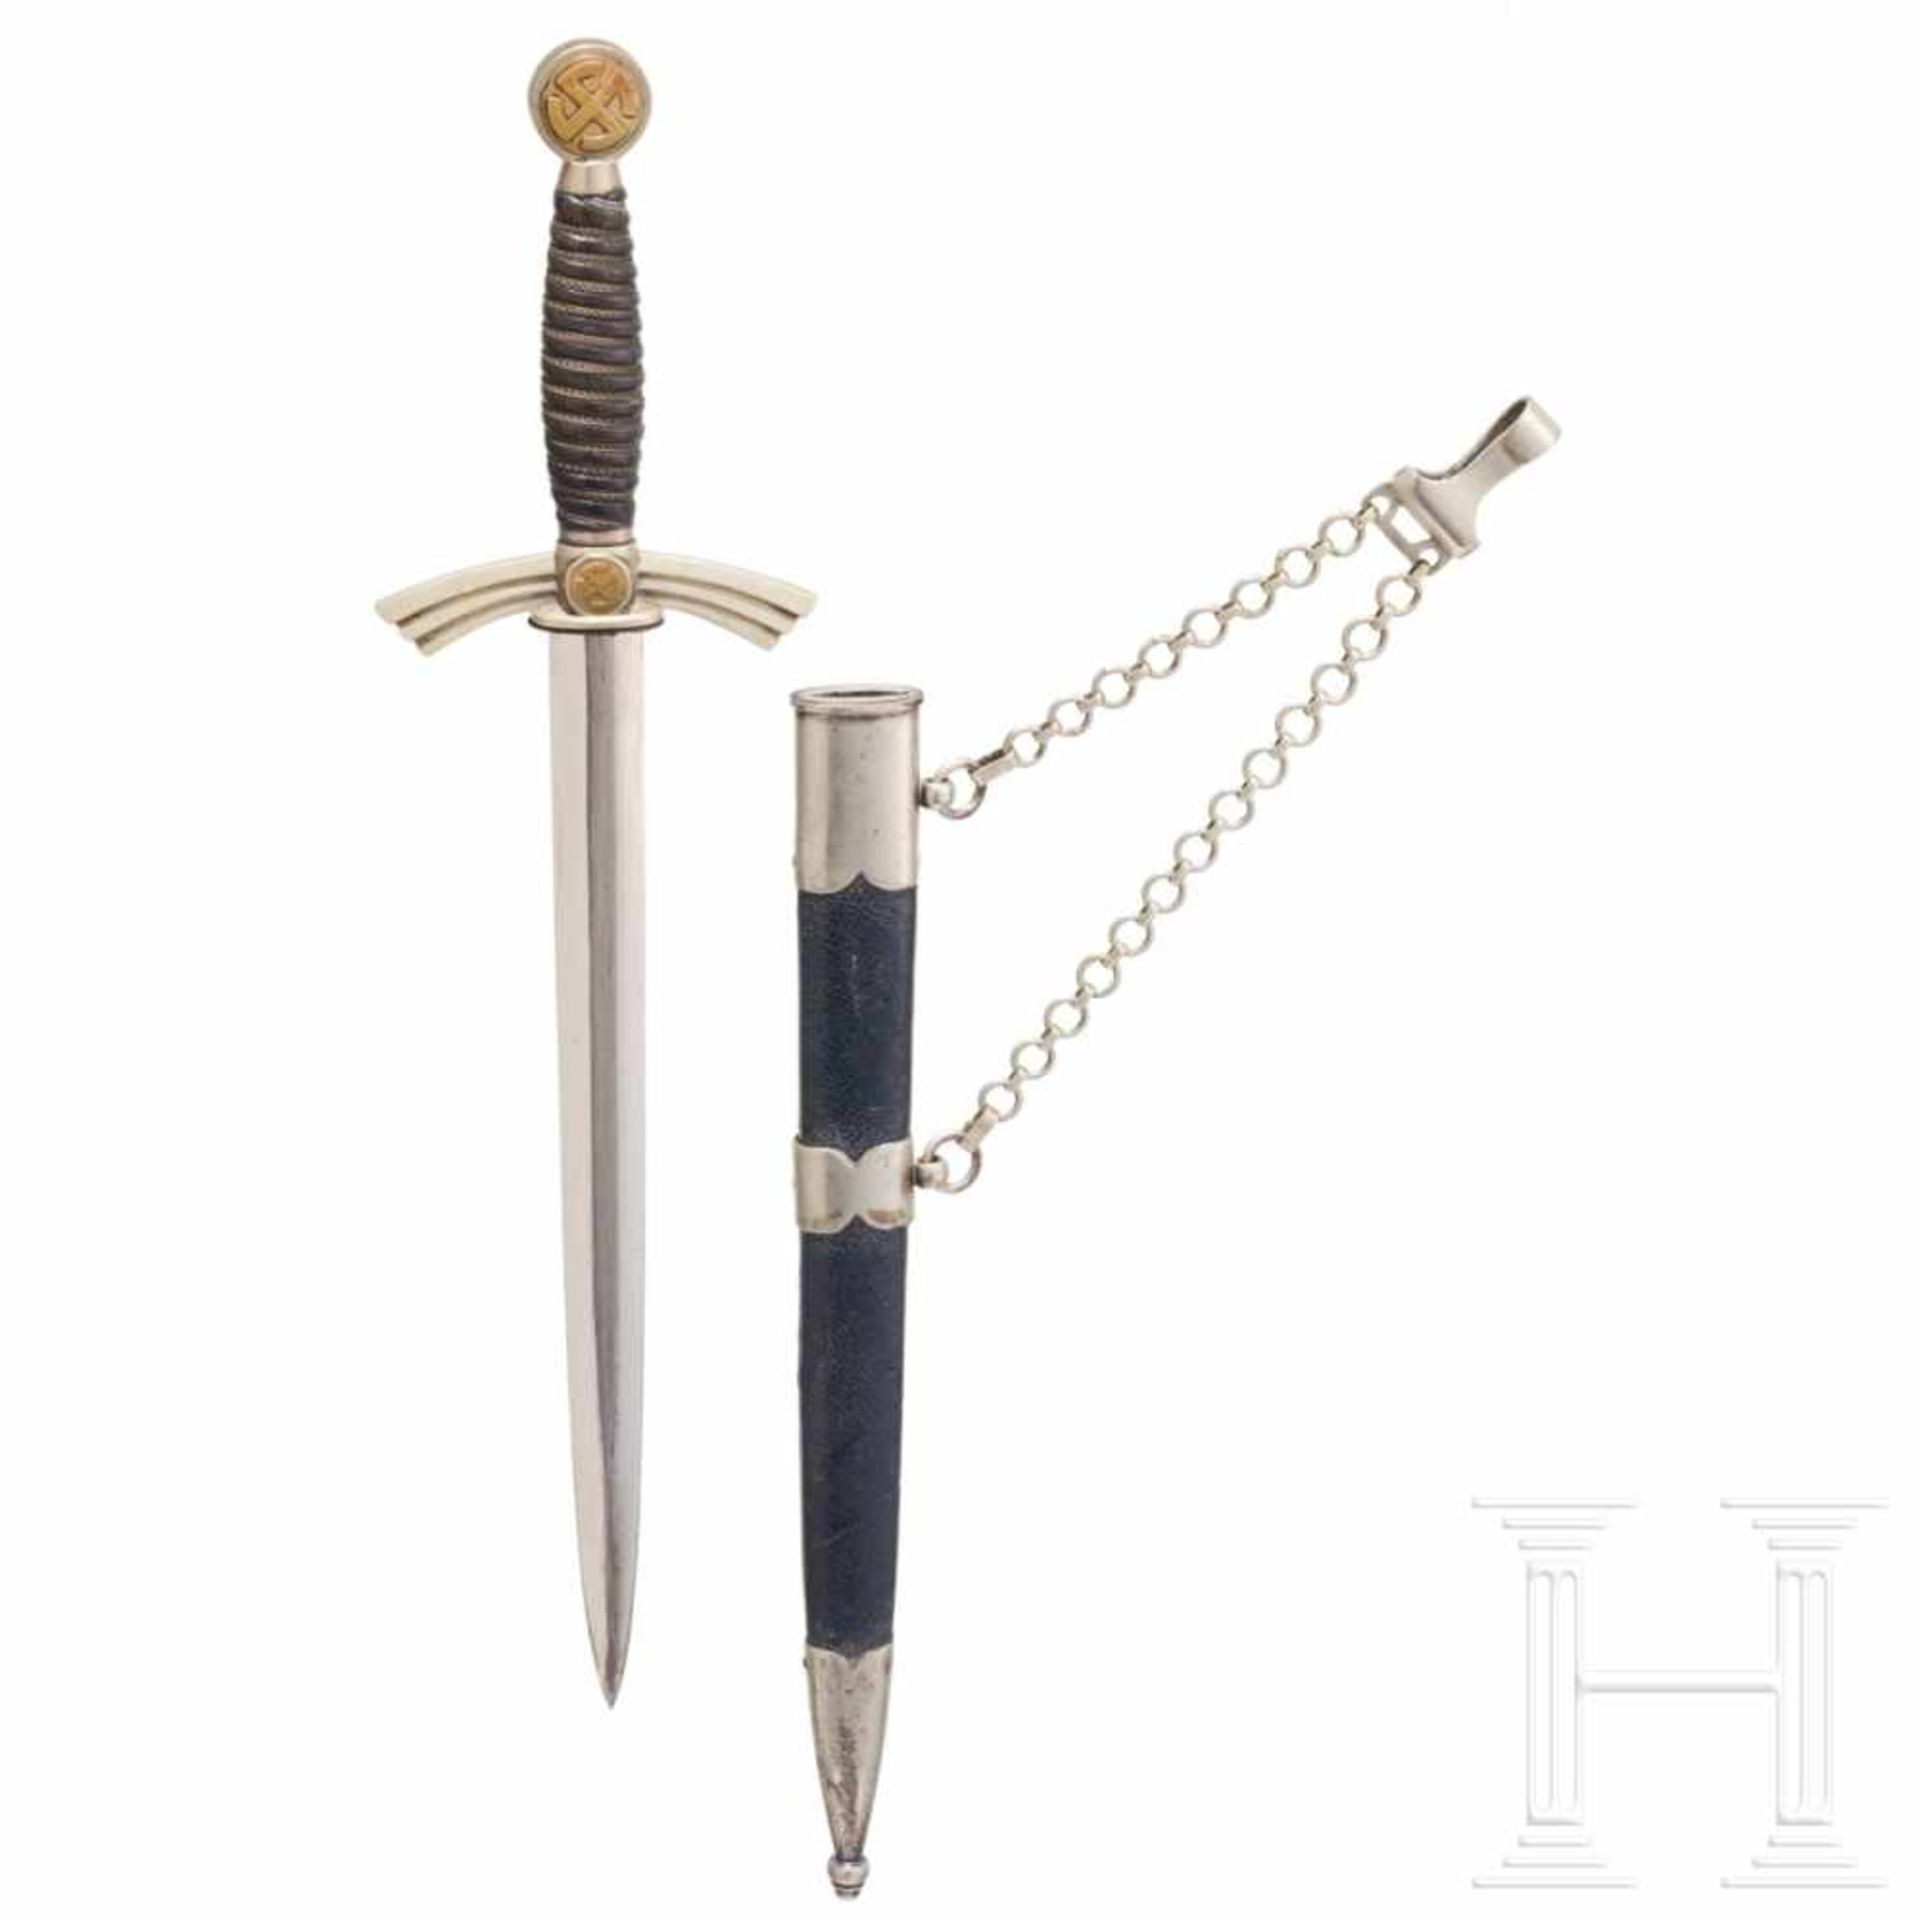 An air force officers dagger M 35, so-called "Borddolch", a heavy version made by Paul Weyersberg in